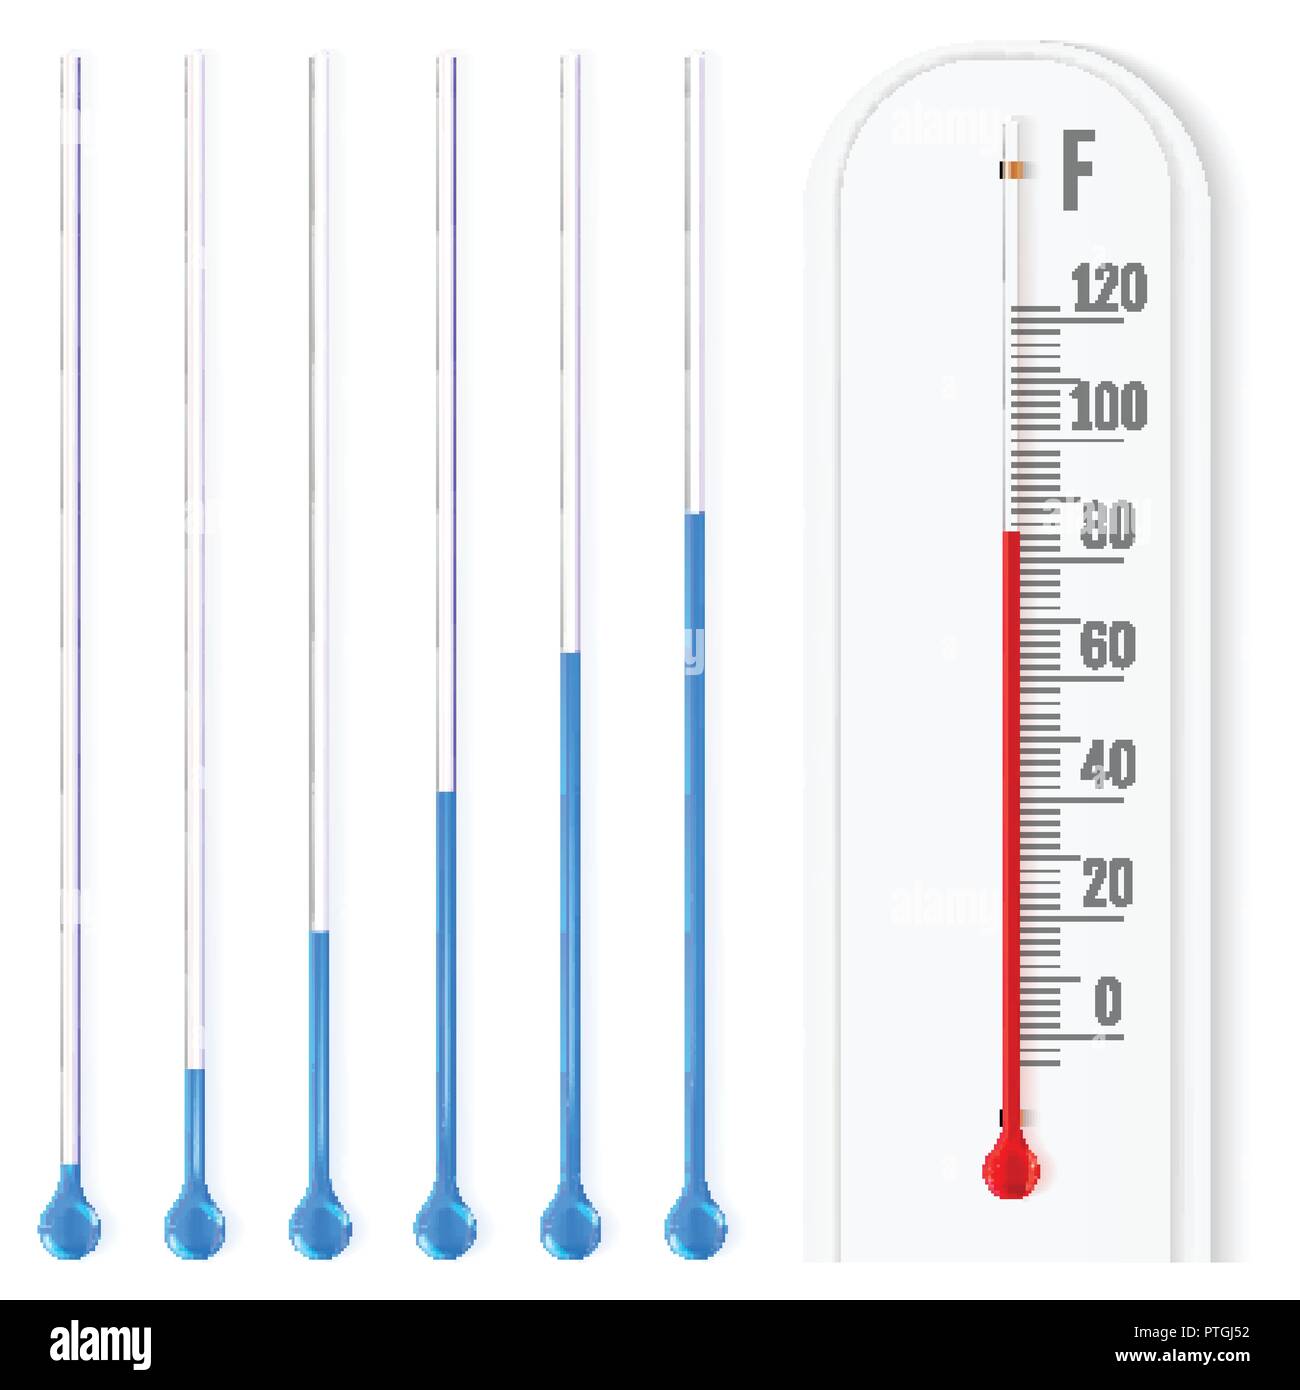 https://c8.alamy.com/comp/PTGJ52/realistic-liquid-thermometer-with-fahrenheit-scale-red-and-blue-indicators-vector-illustration-PTGJ52.jpg